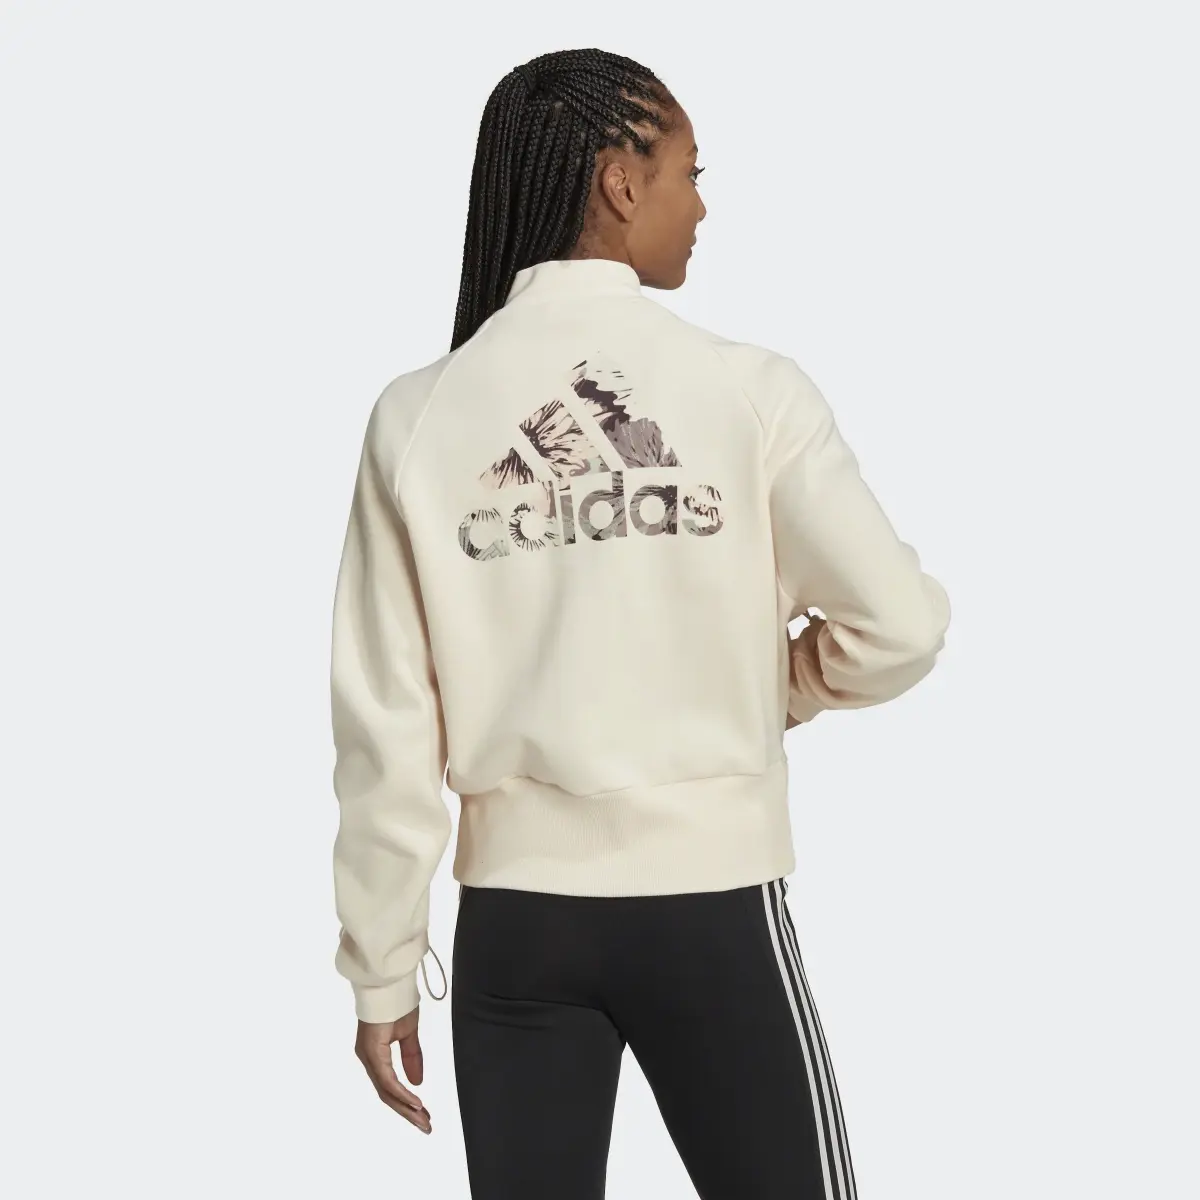 Adidas Allover Print Track Top. 3